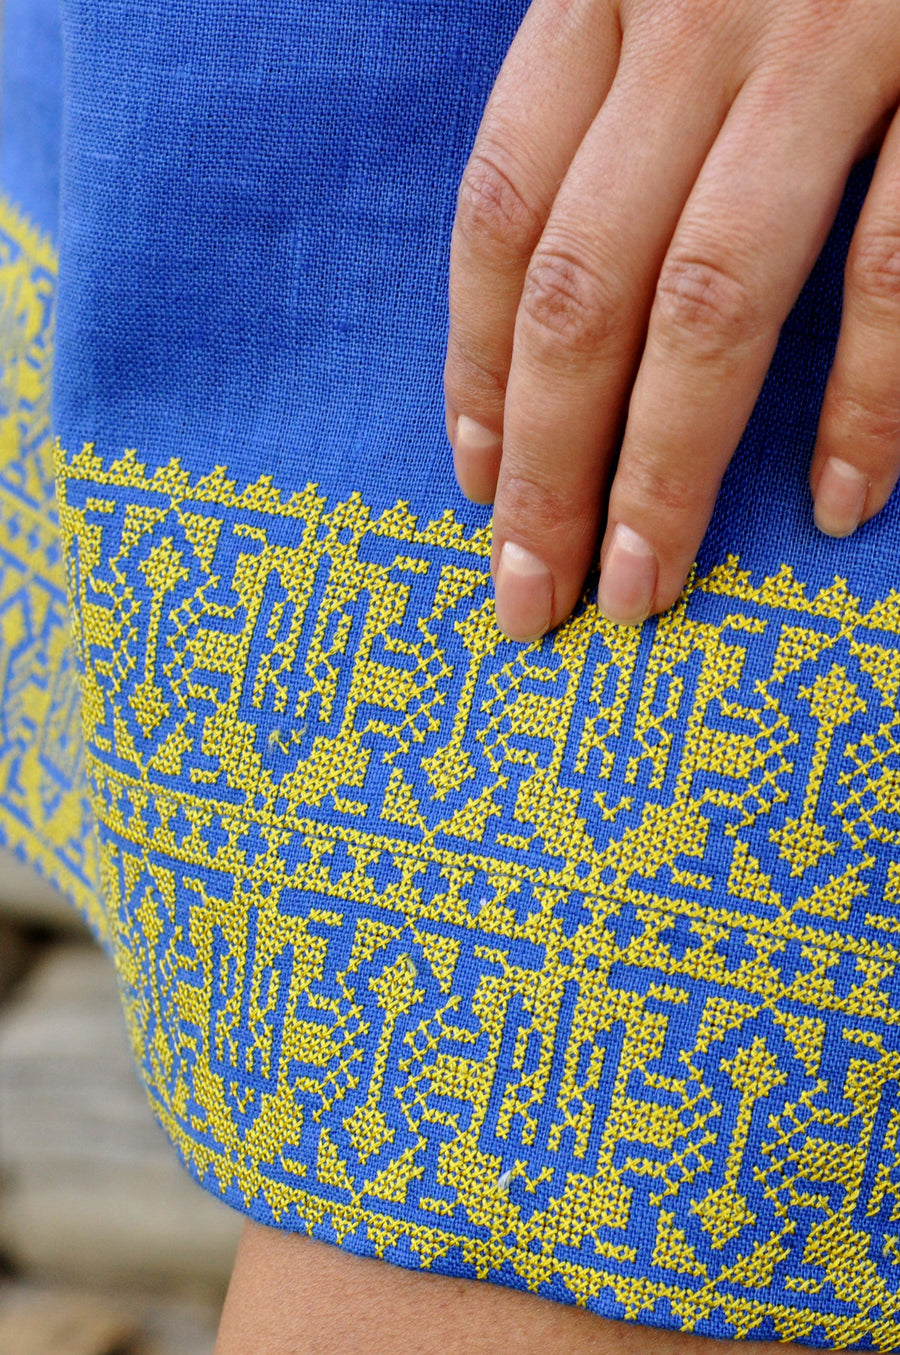 Embroidered blue dress in Ukrainian national style